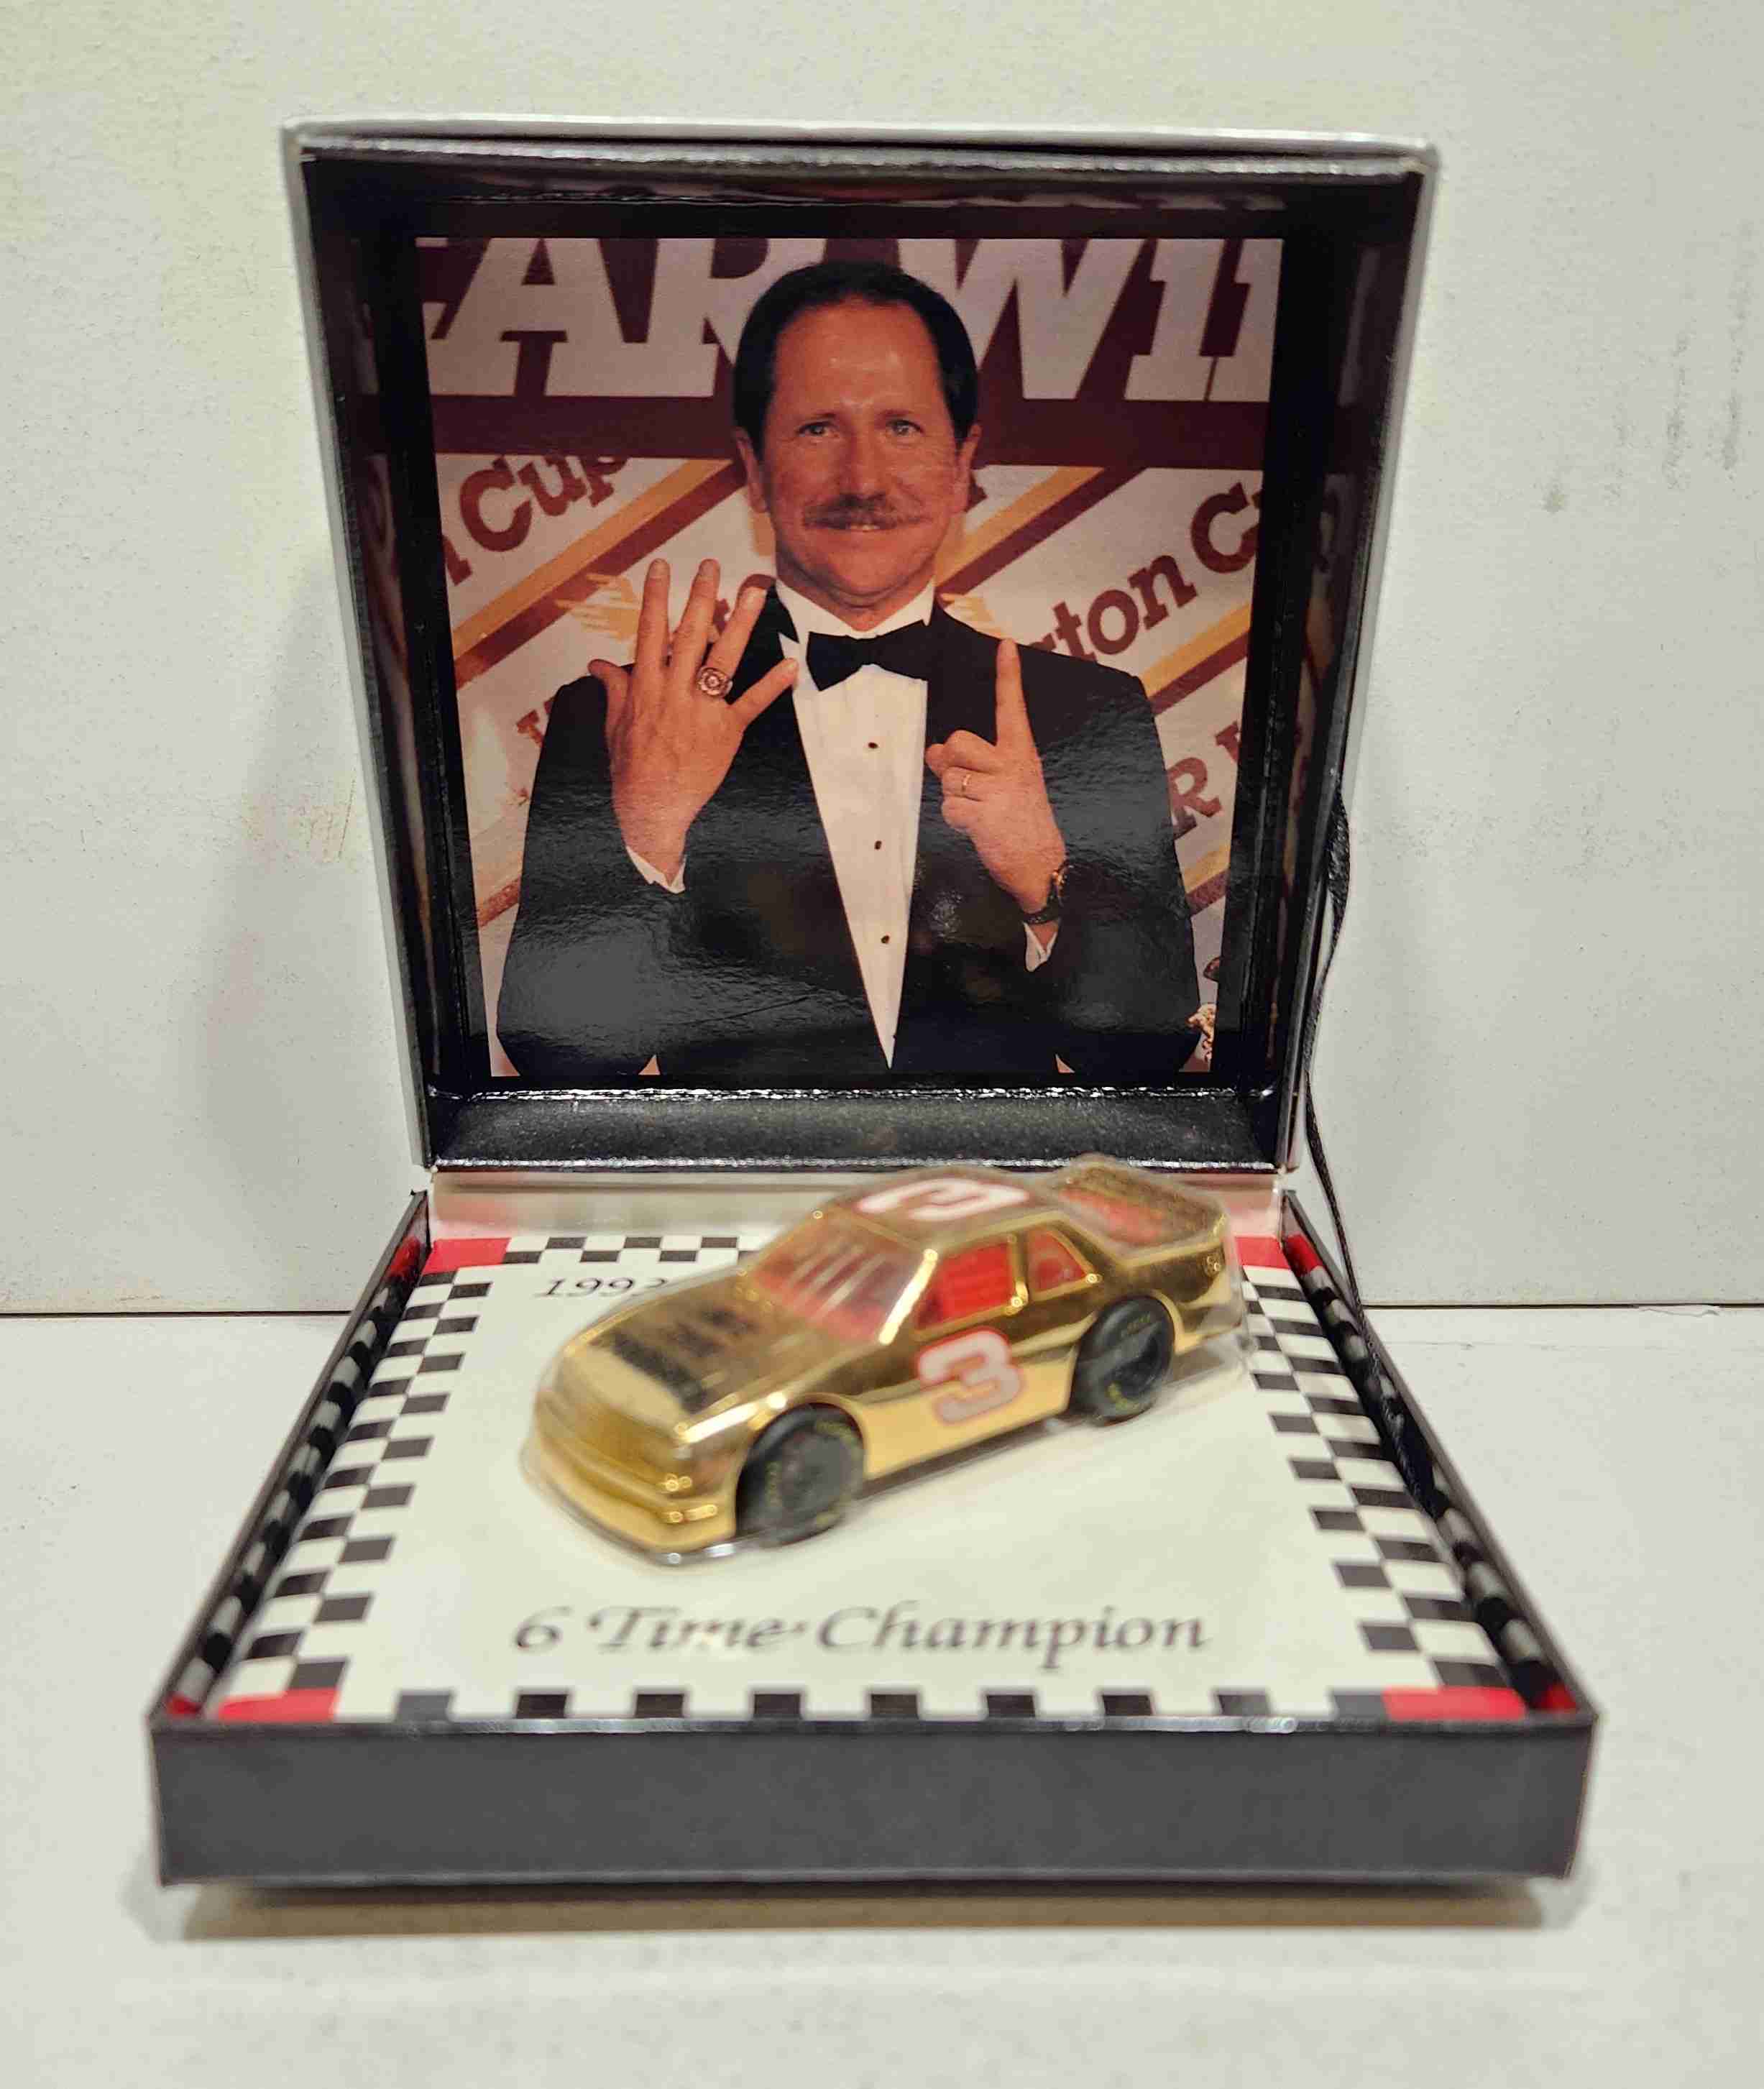 1993 Dale Earnhardt 1/64th Goodwrench "6 Time Winston Cup Champion" Gold Lumina